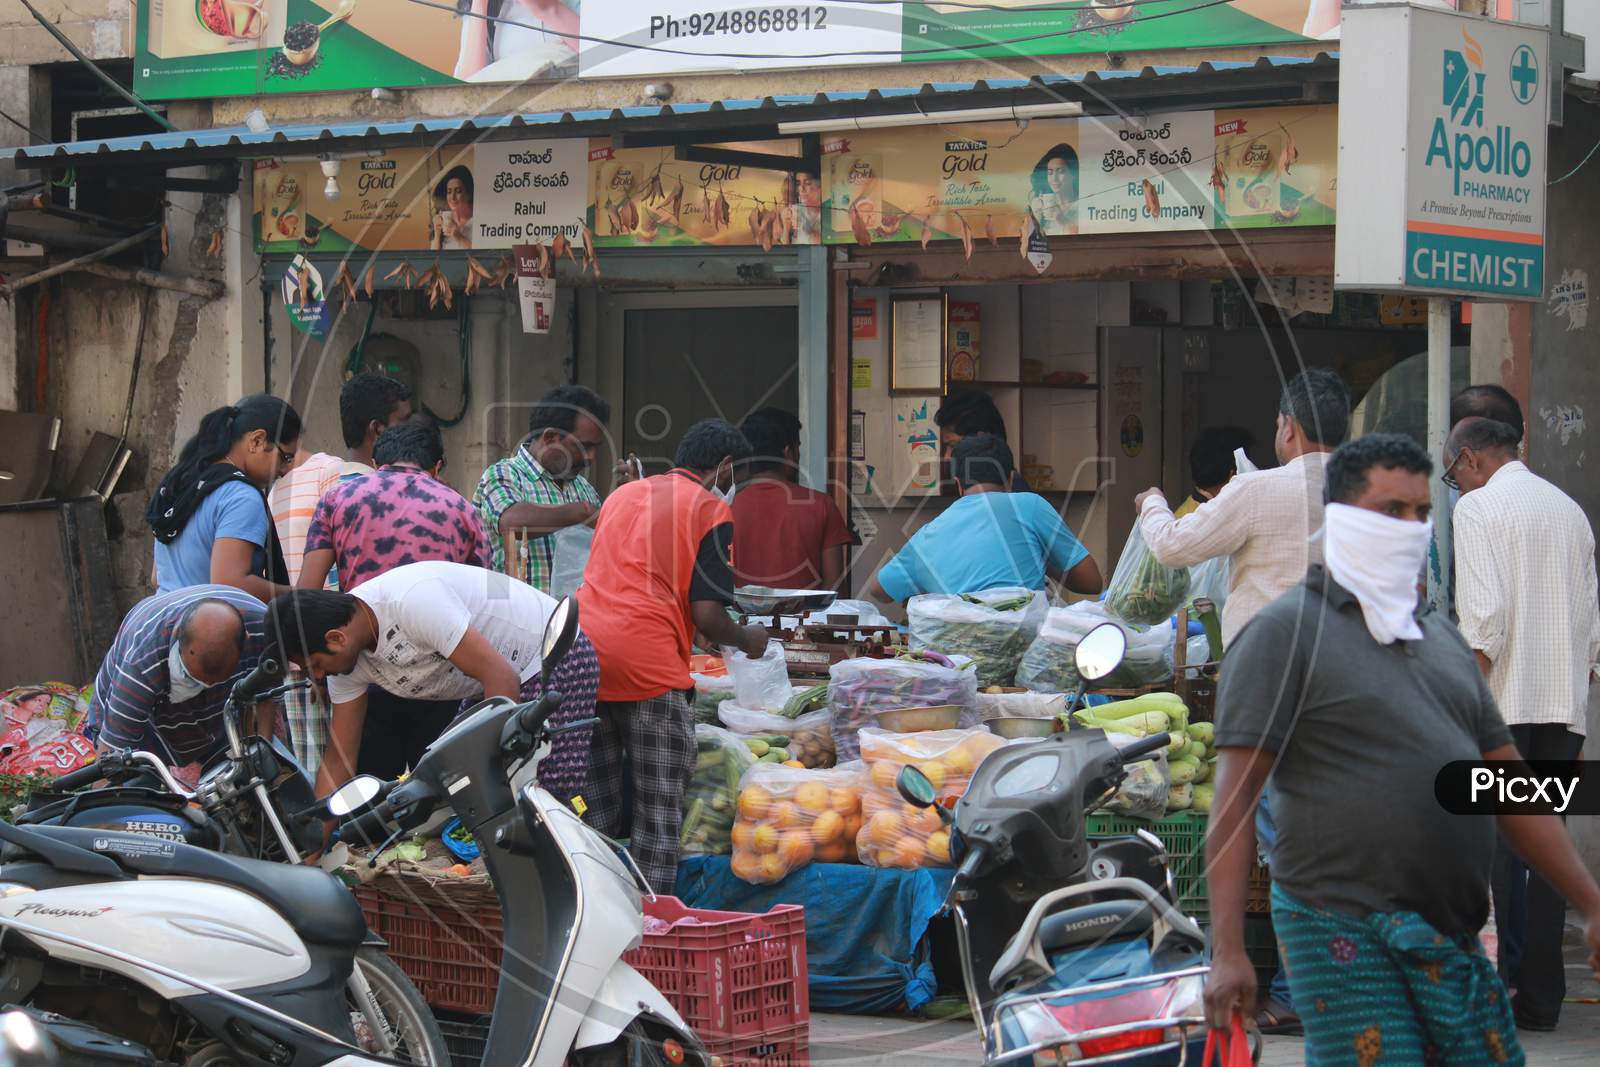 People Wearing Masks At Crowdy Places And At Vegetable And Groceries Stores Amidst Corona Virus Outbreak in India